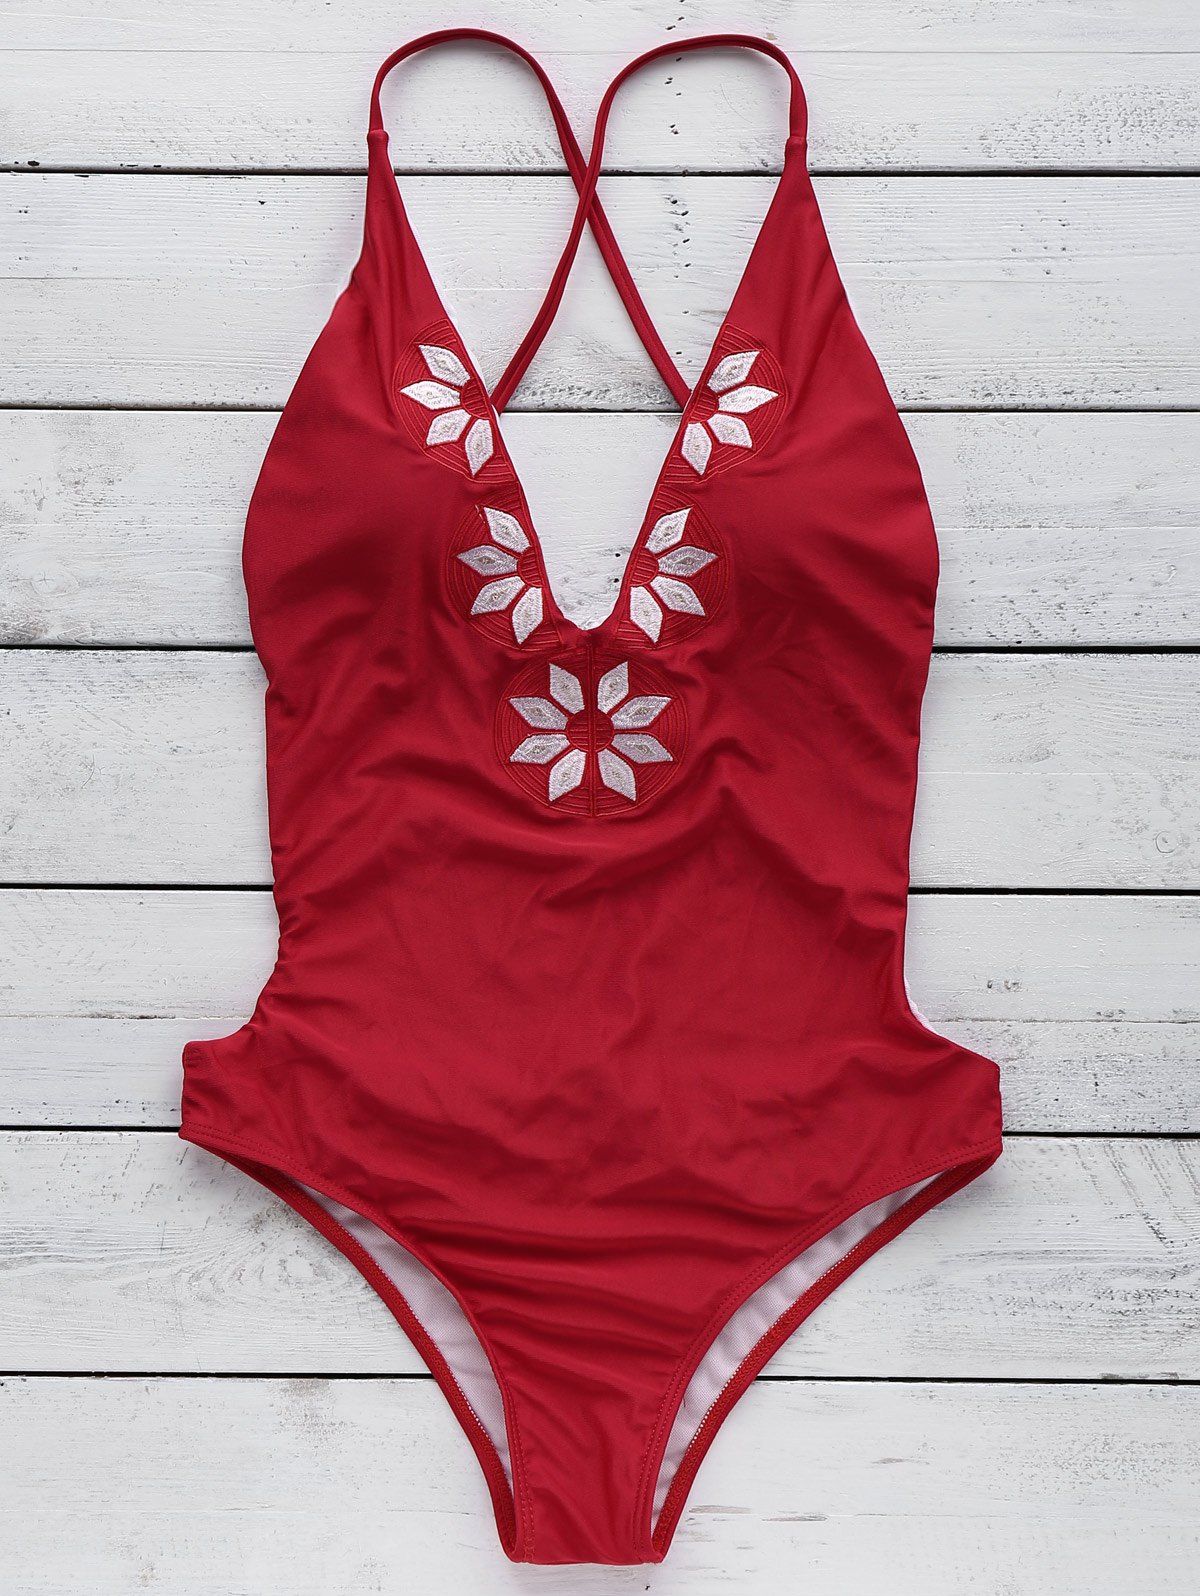 Floral Embroidered Chic Criss Cross Backless Women's Swimwear - RED M